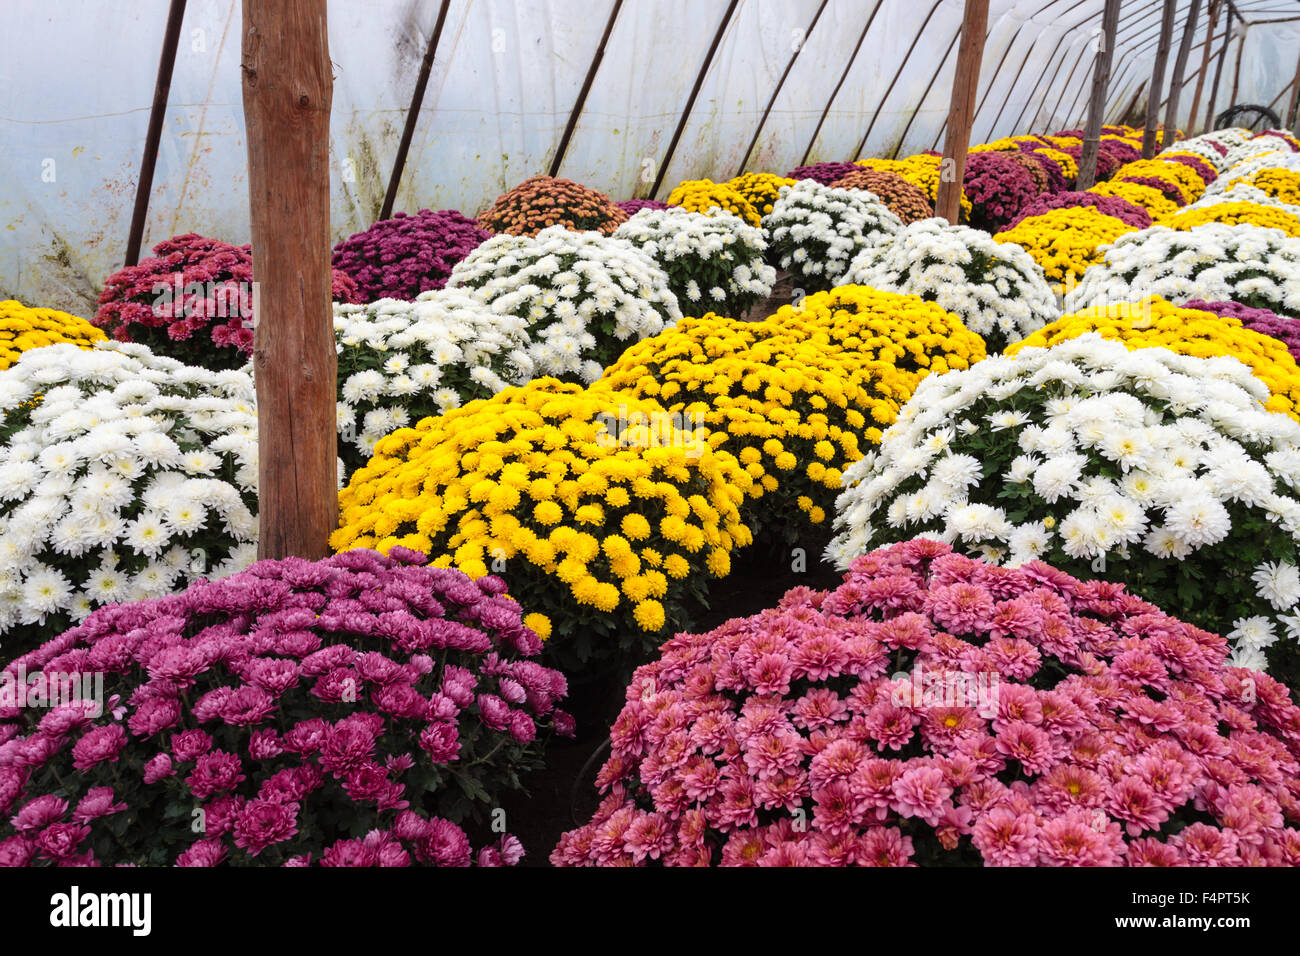 White pink yellow Chrysanthemum Morifolium flowers garden in greenhouse, before 1-st November as All Saints Day in Christianity. Stock Photo